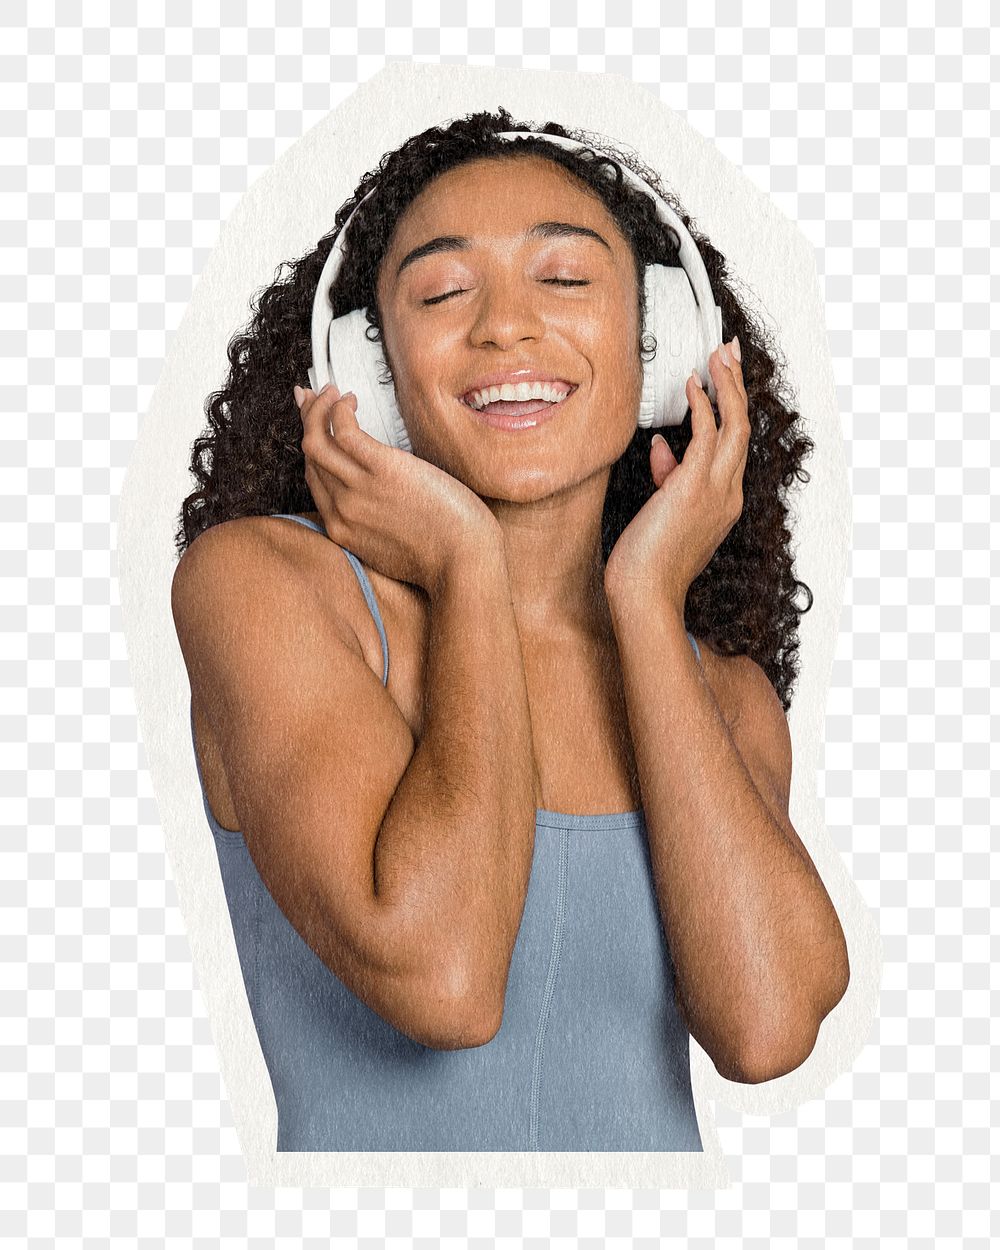 Png woman with headphones sticker, transparent background